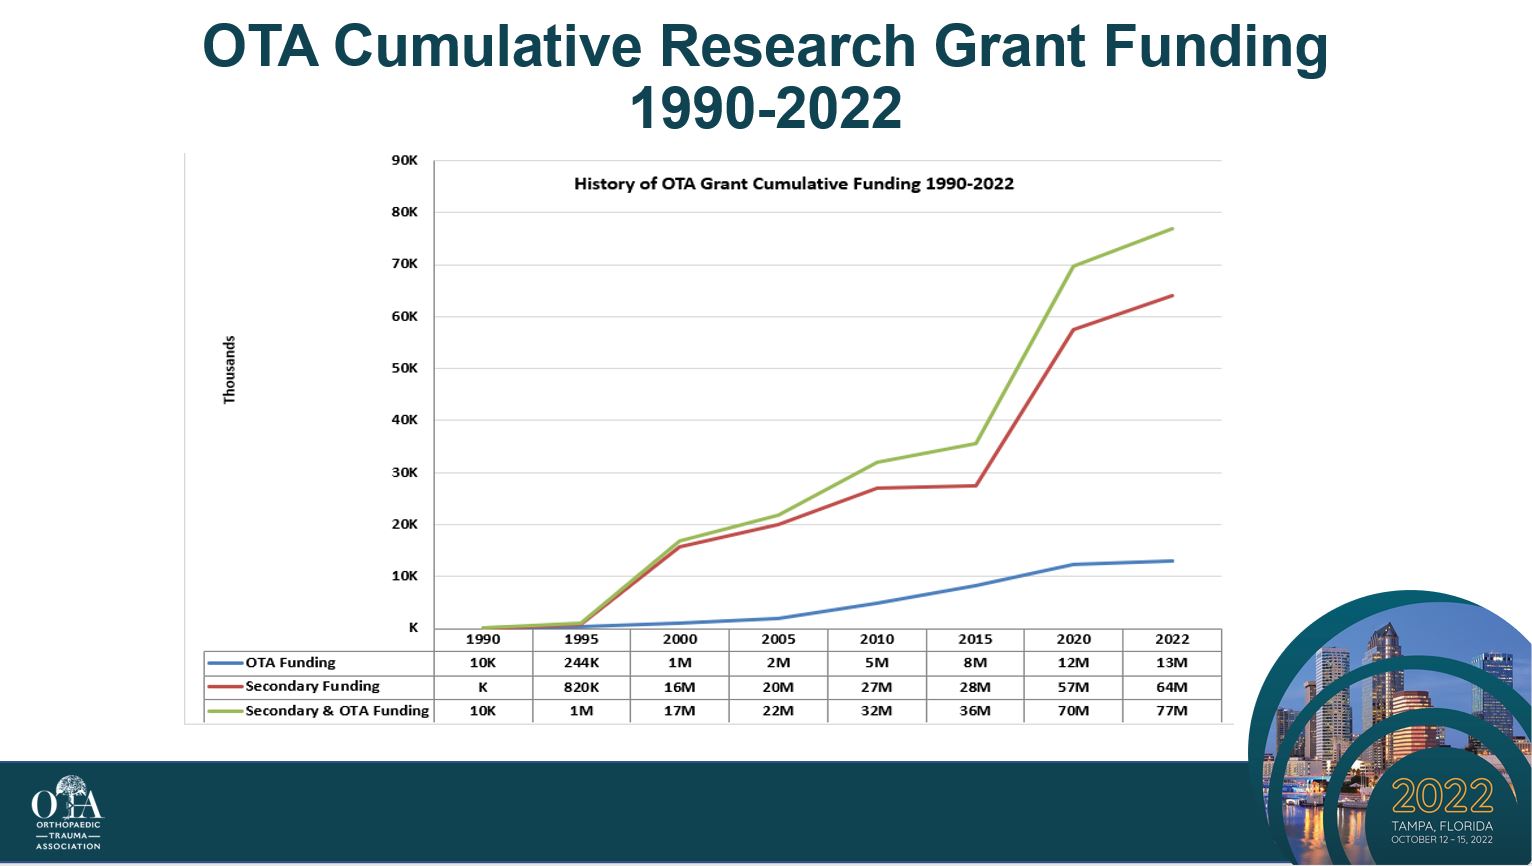 OTA Research grant funding from 1990-2022